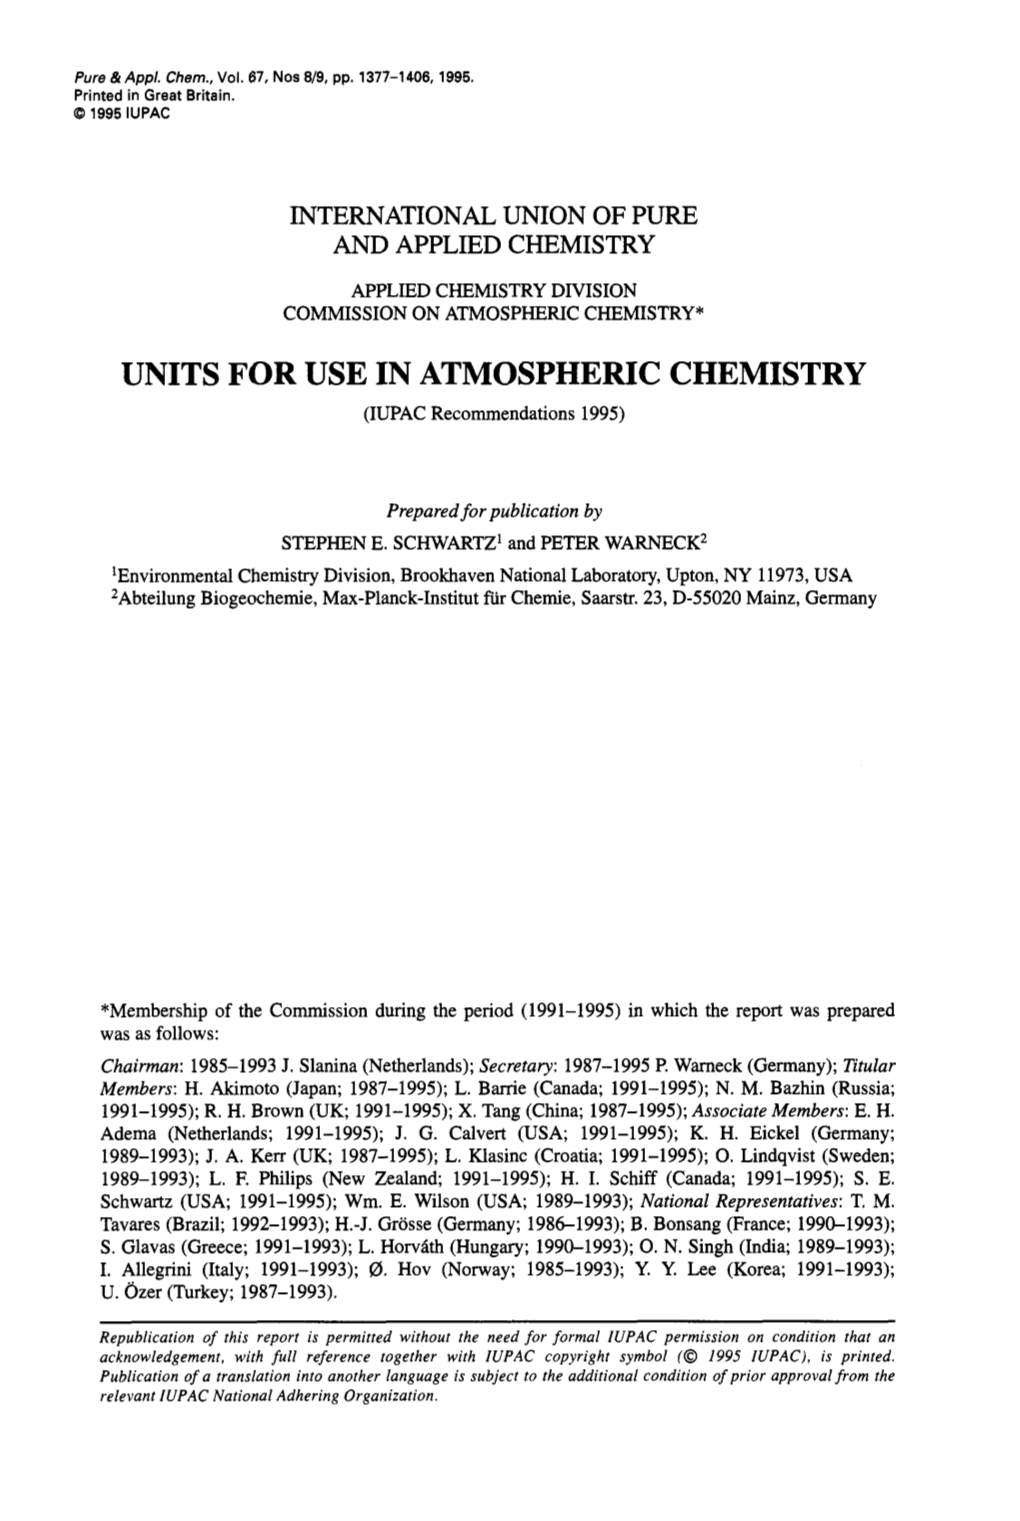 UNITS for USE in ATMOSPHERIC CHEMISTRY (IUPAC Recommendations 1995)